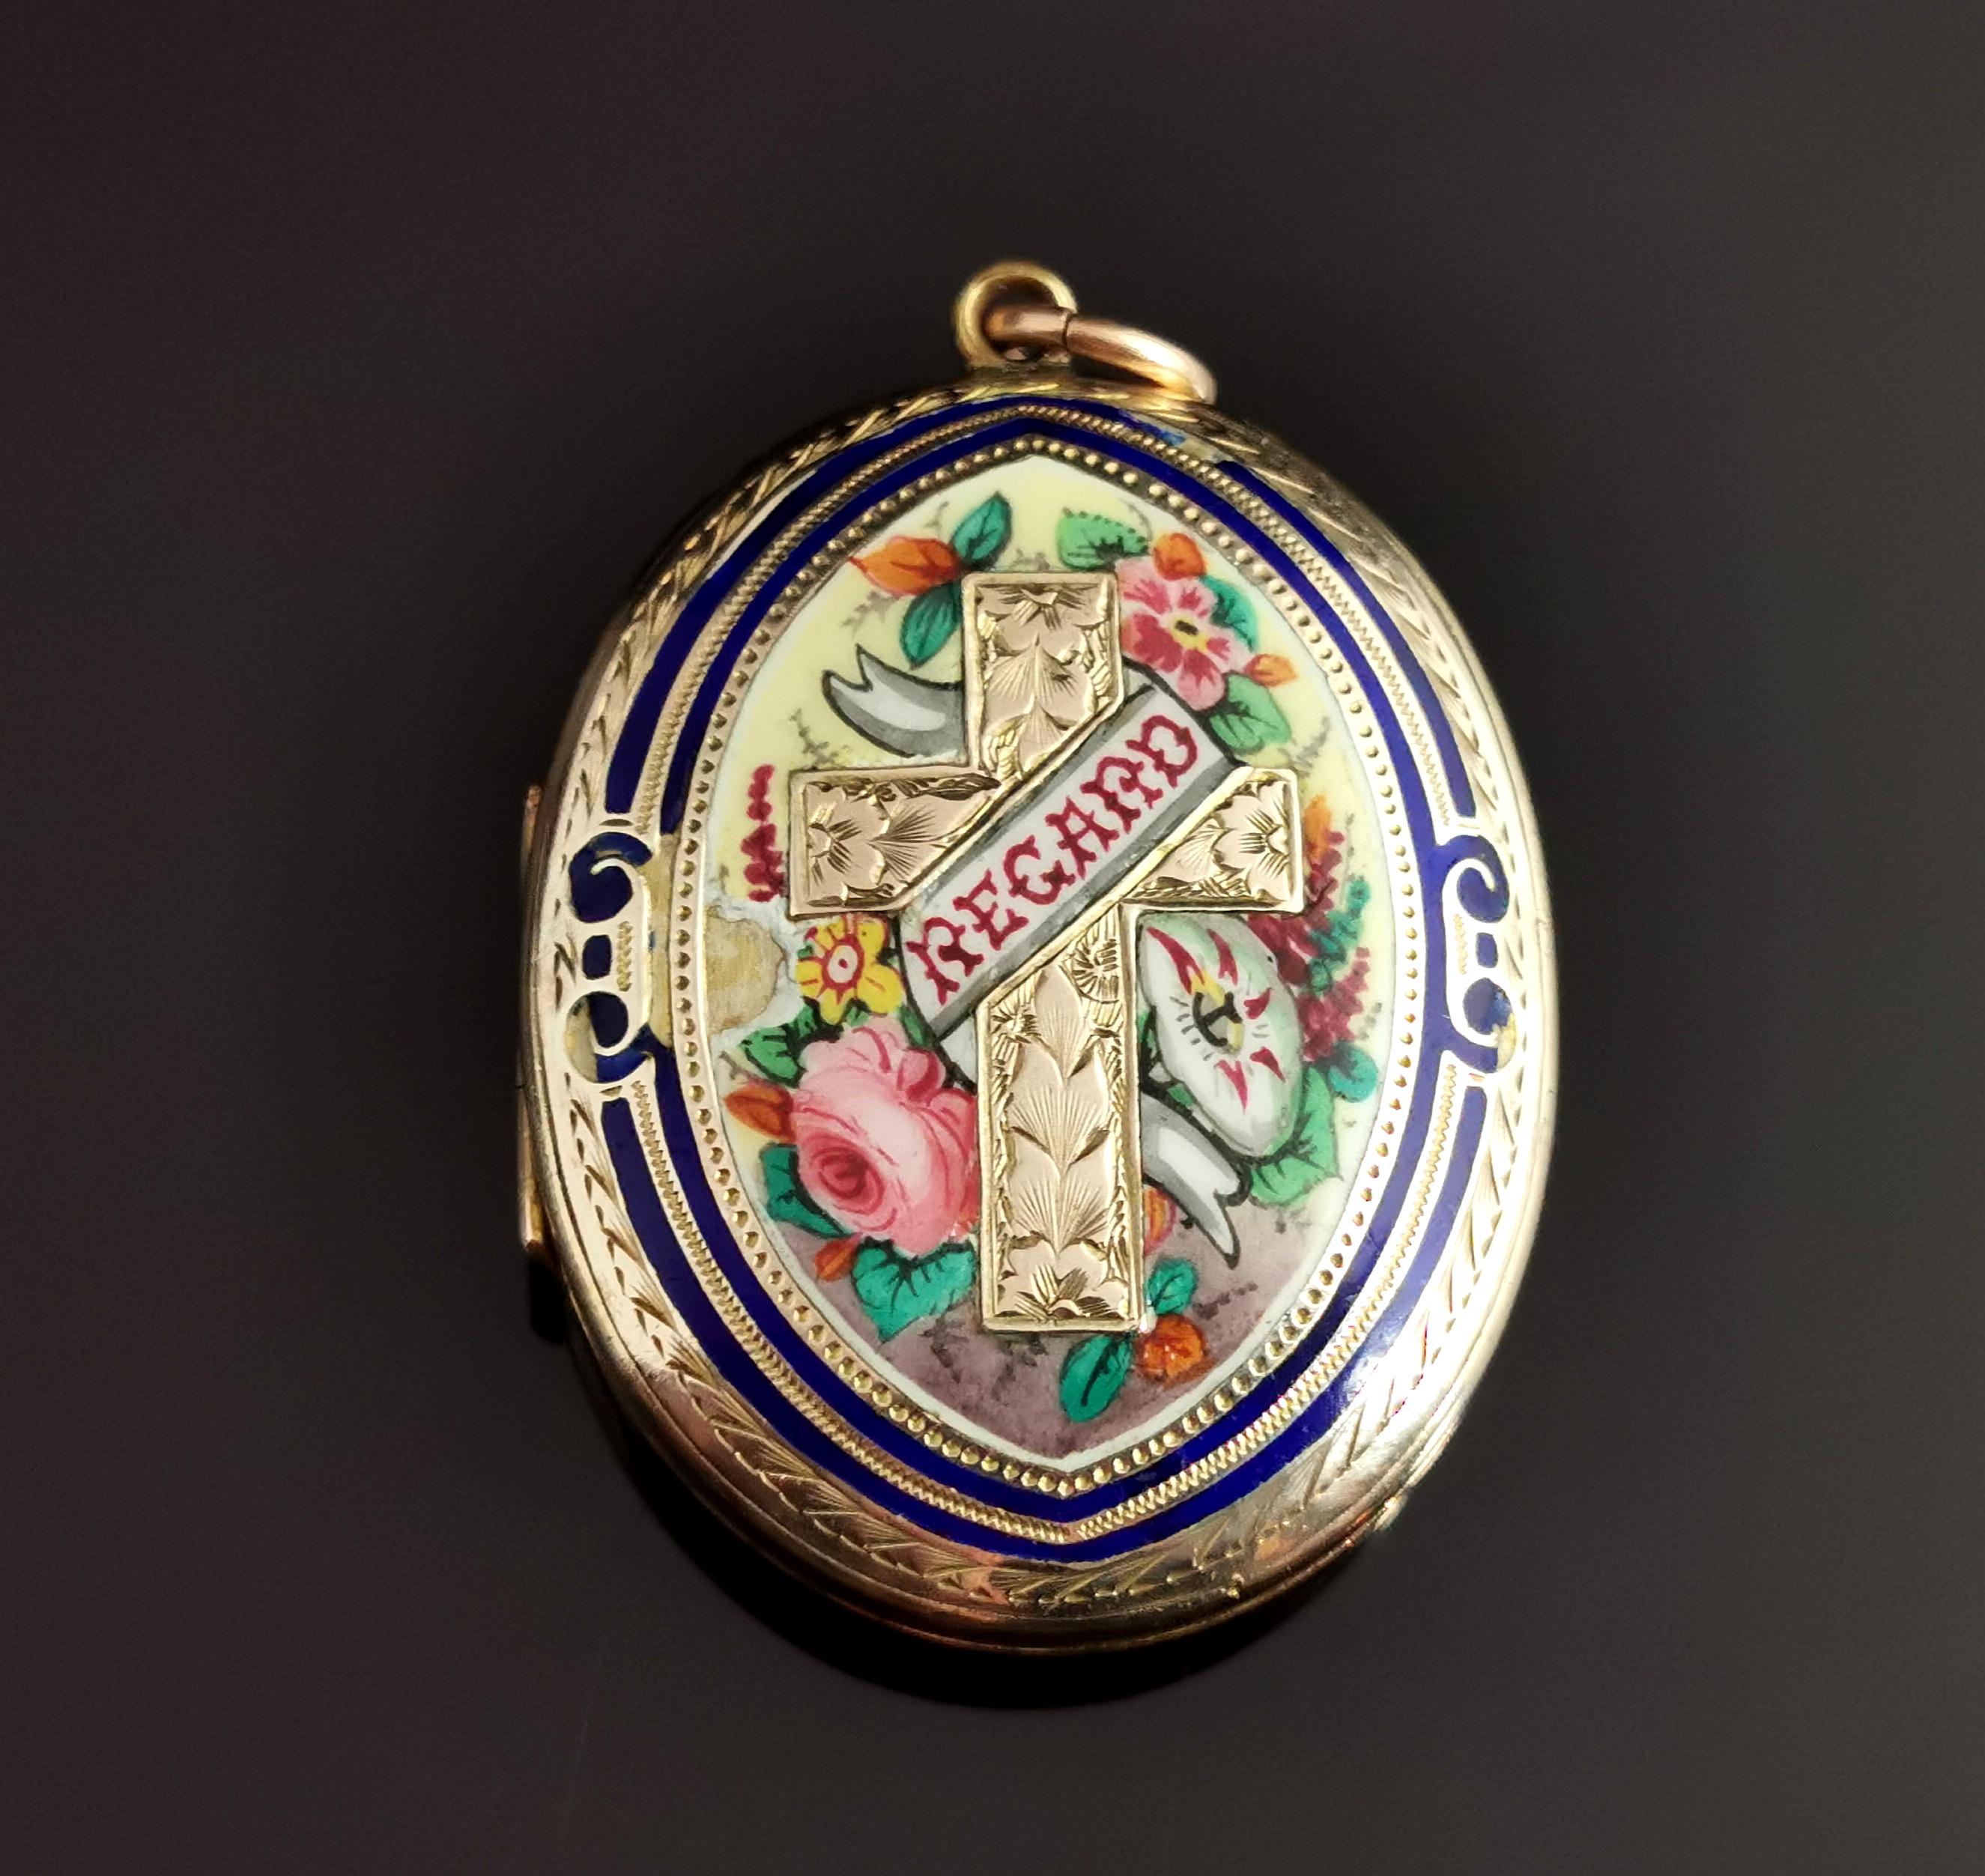 A stunning antique Victorian 9kt gold Regard locket.

This is a really very beautiful example of a Regard locket, heavily engraved 9kt gold with a floral engraved design to the reverse and an enamelled design to the front.

The enamelling features